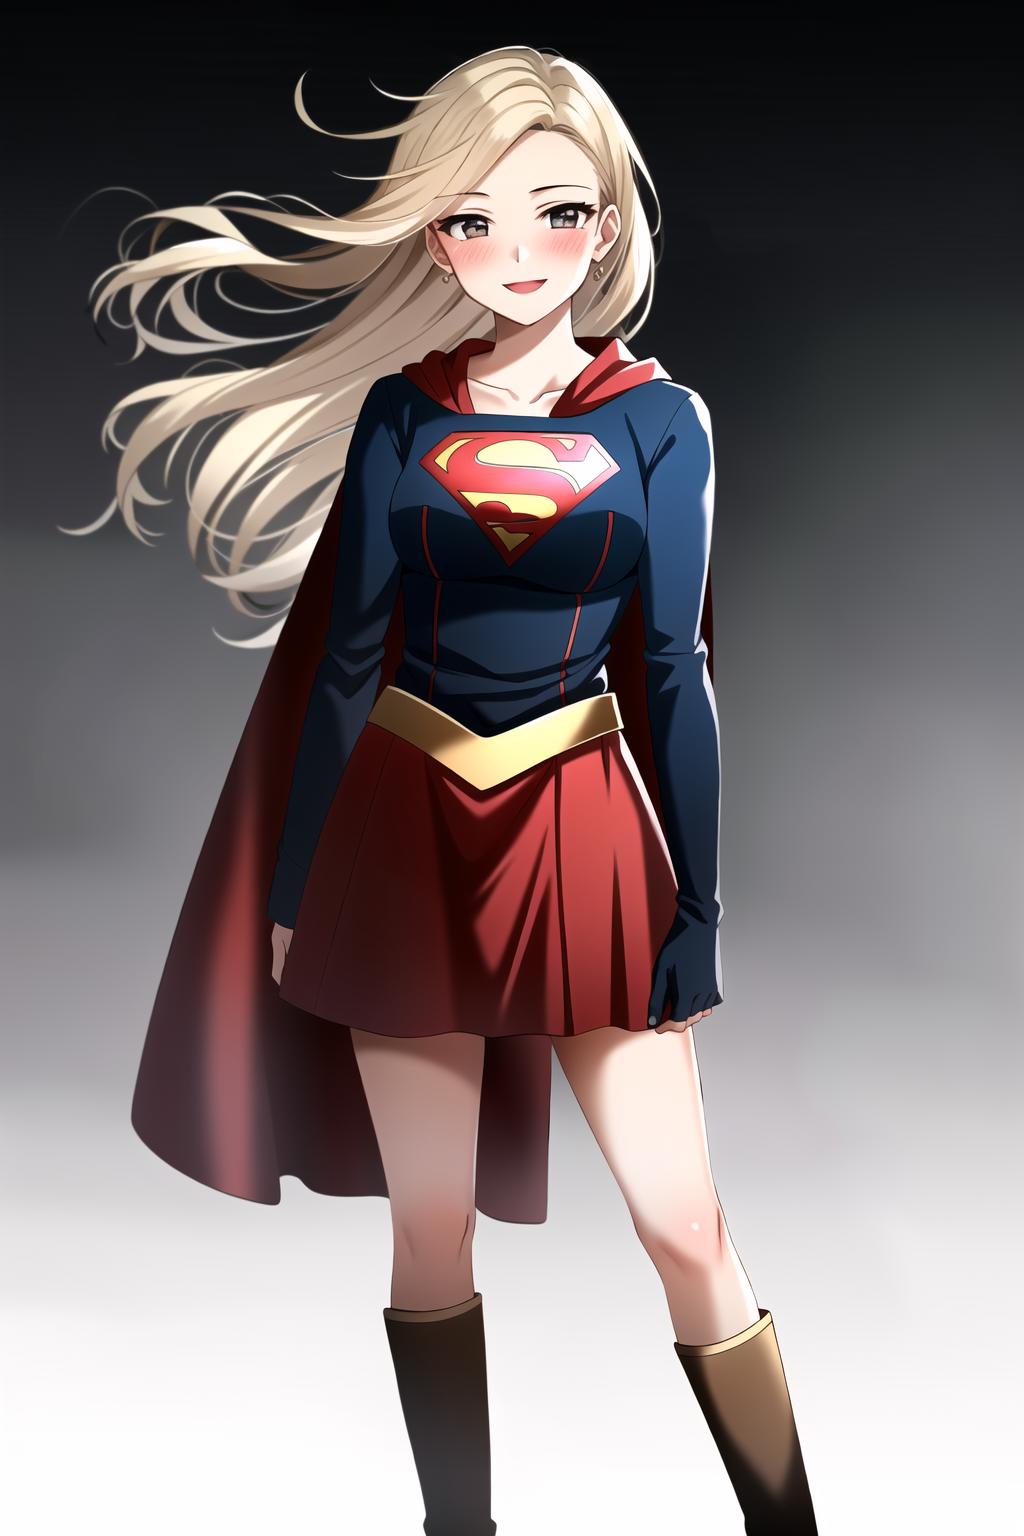 Supergirl (DC Comic) image by Goofy_Ai